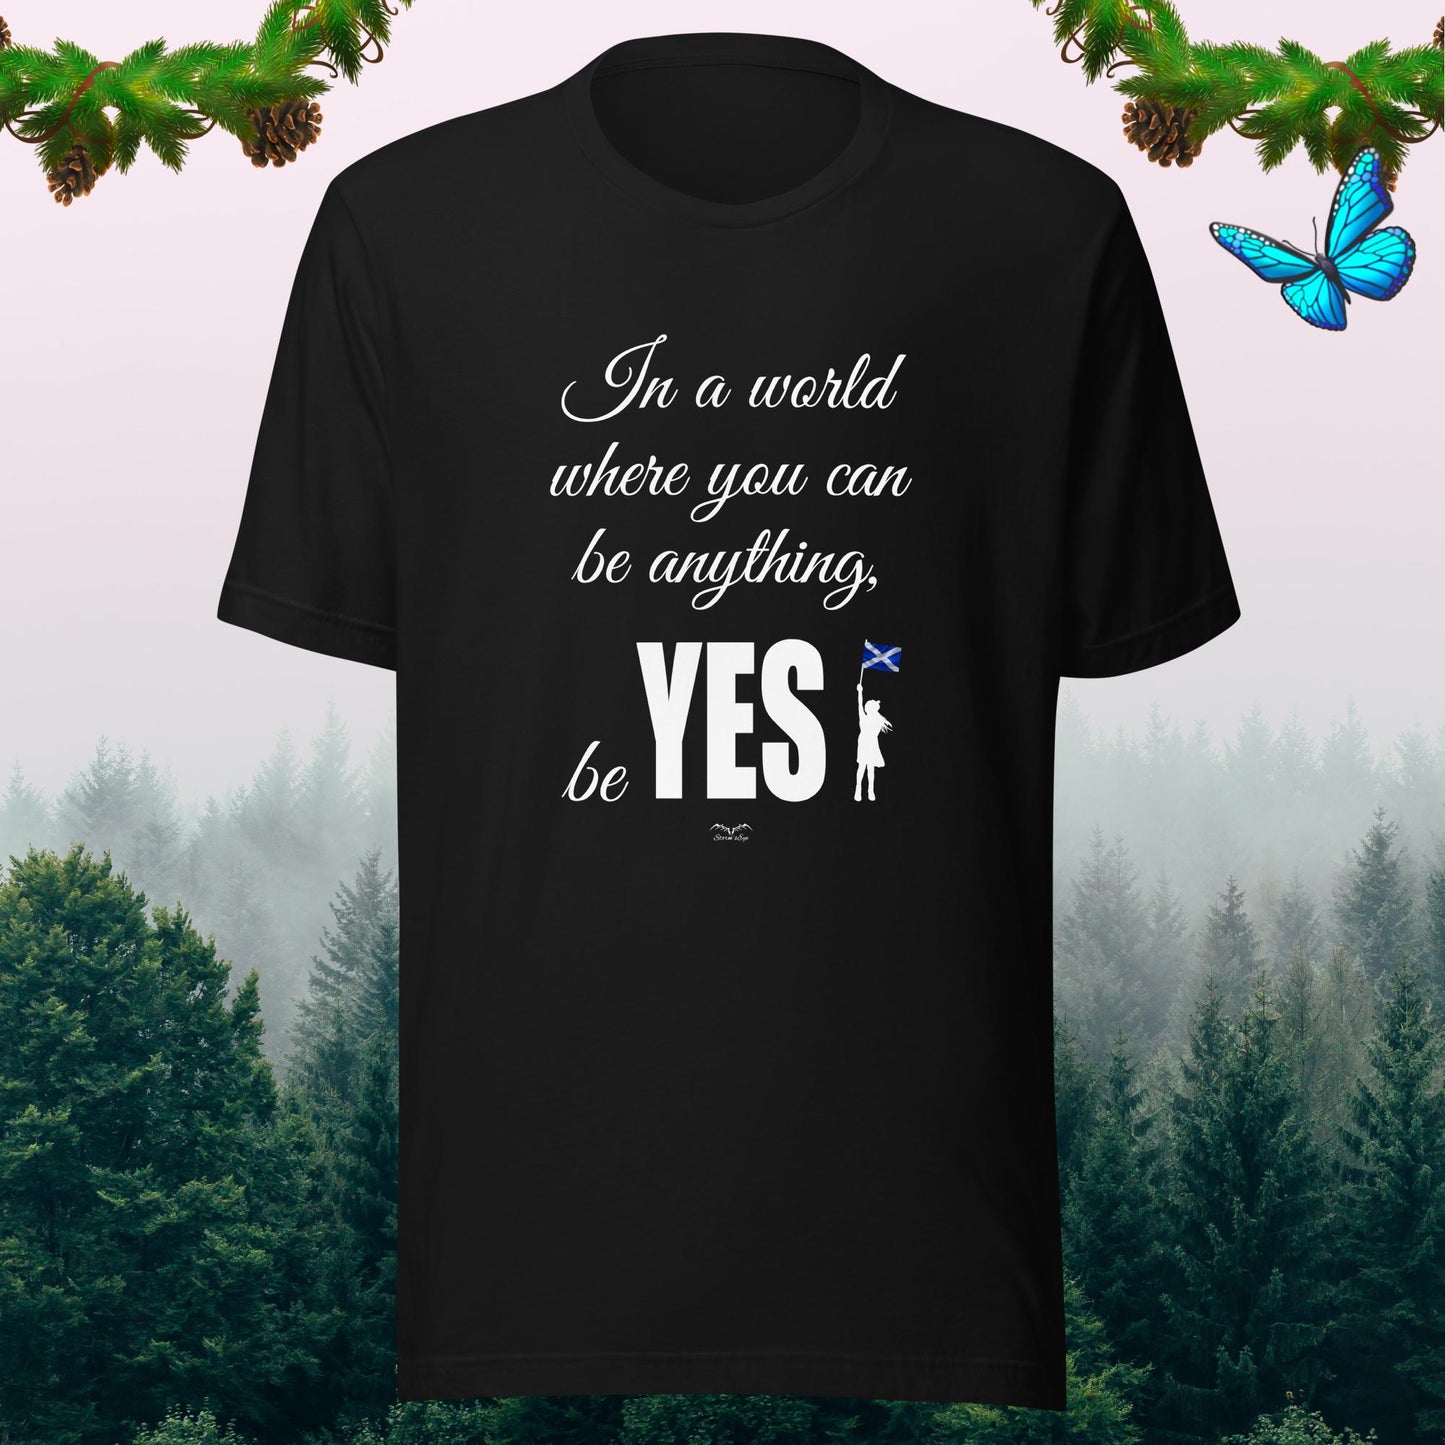 Be Yes Scottish Independence T-shirt black by stormseye design